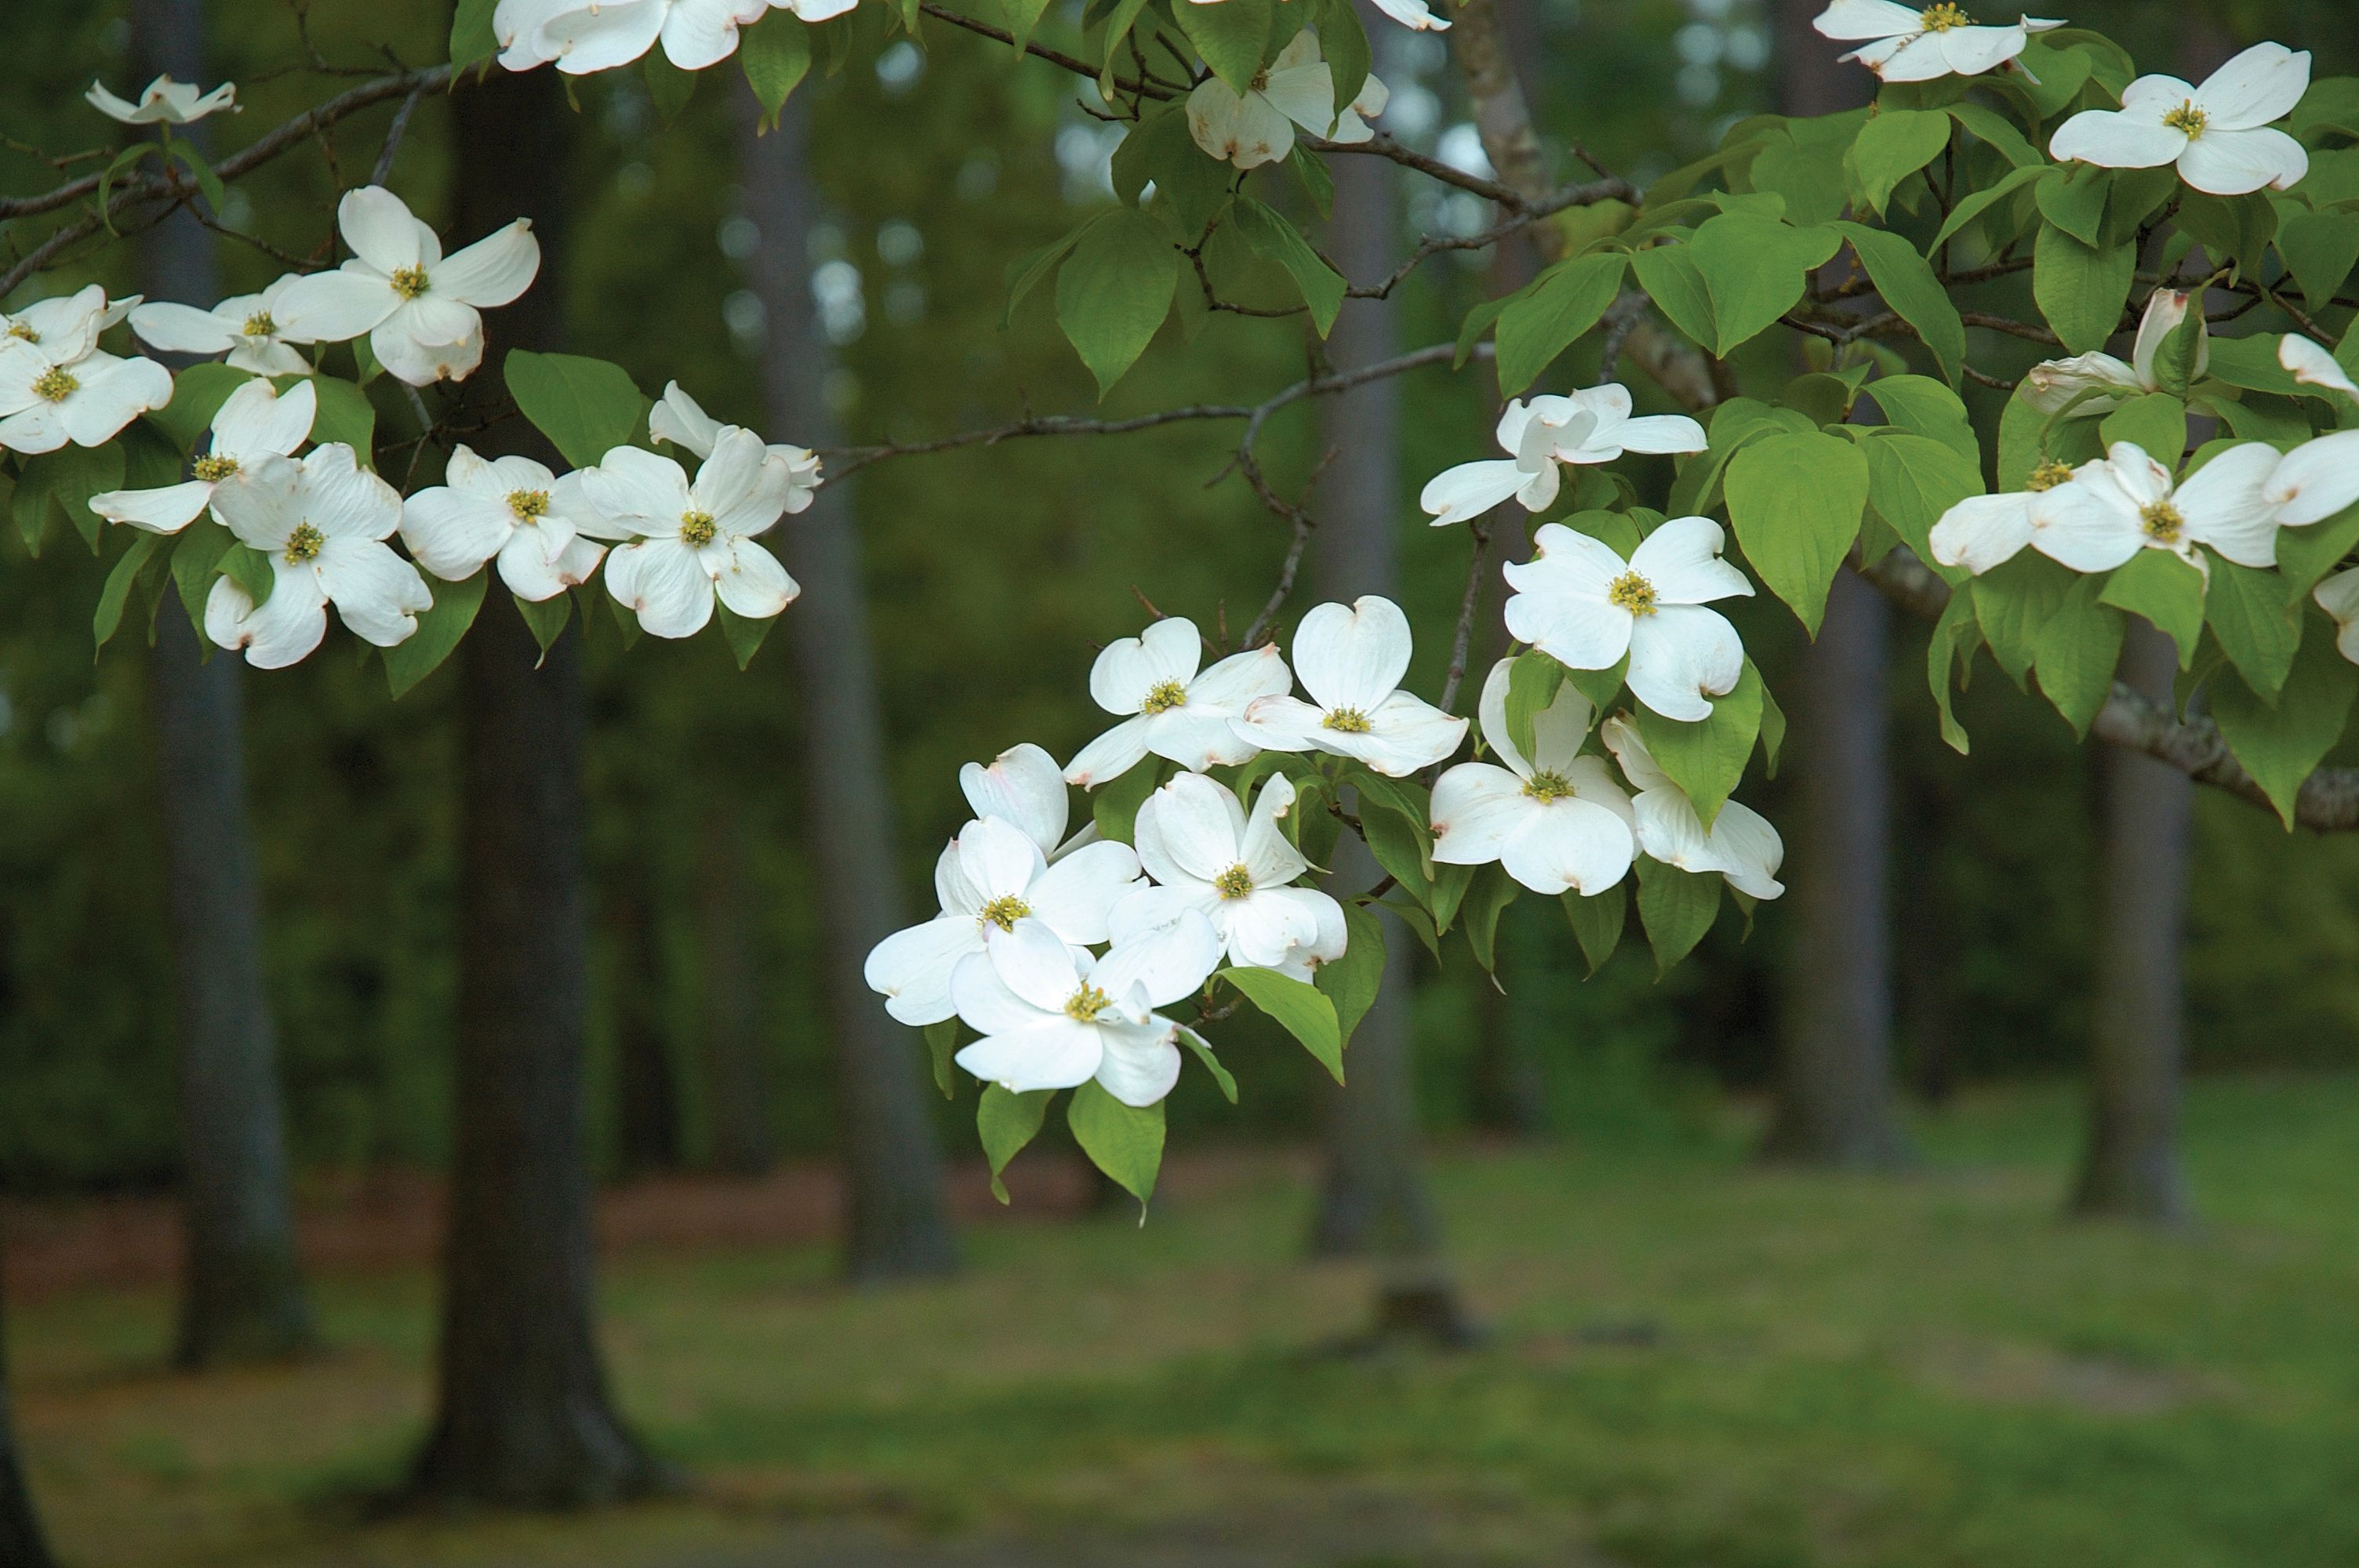 Dogwood Blossoms.  There are trees in the background.